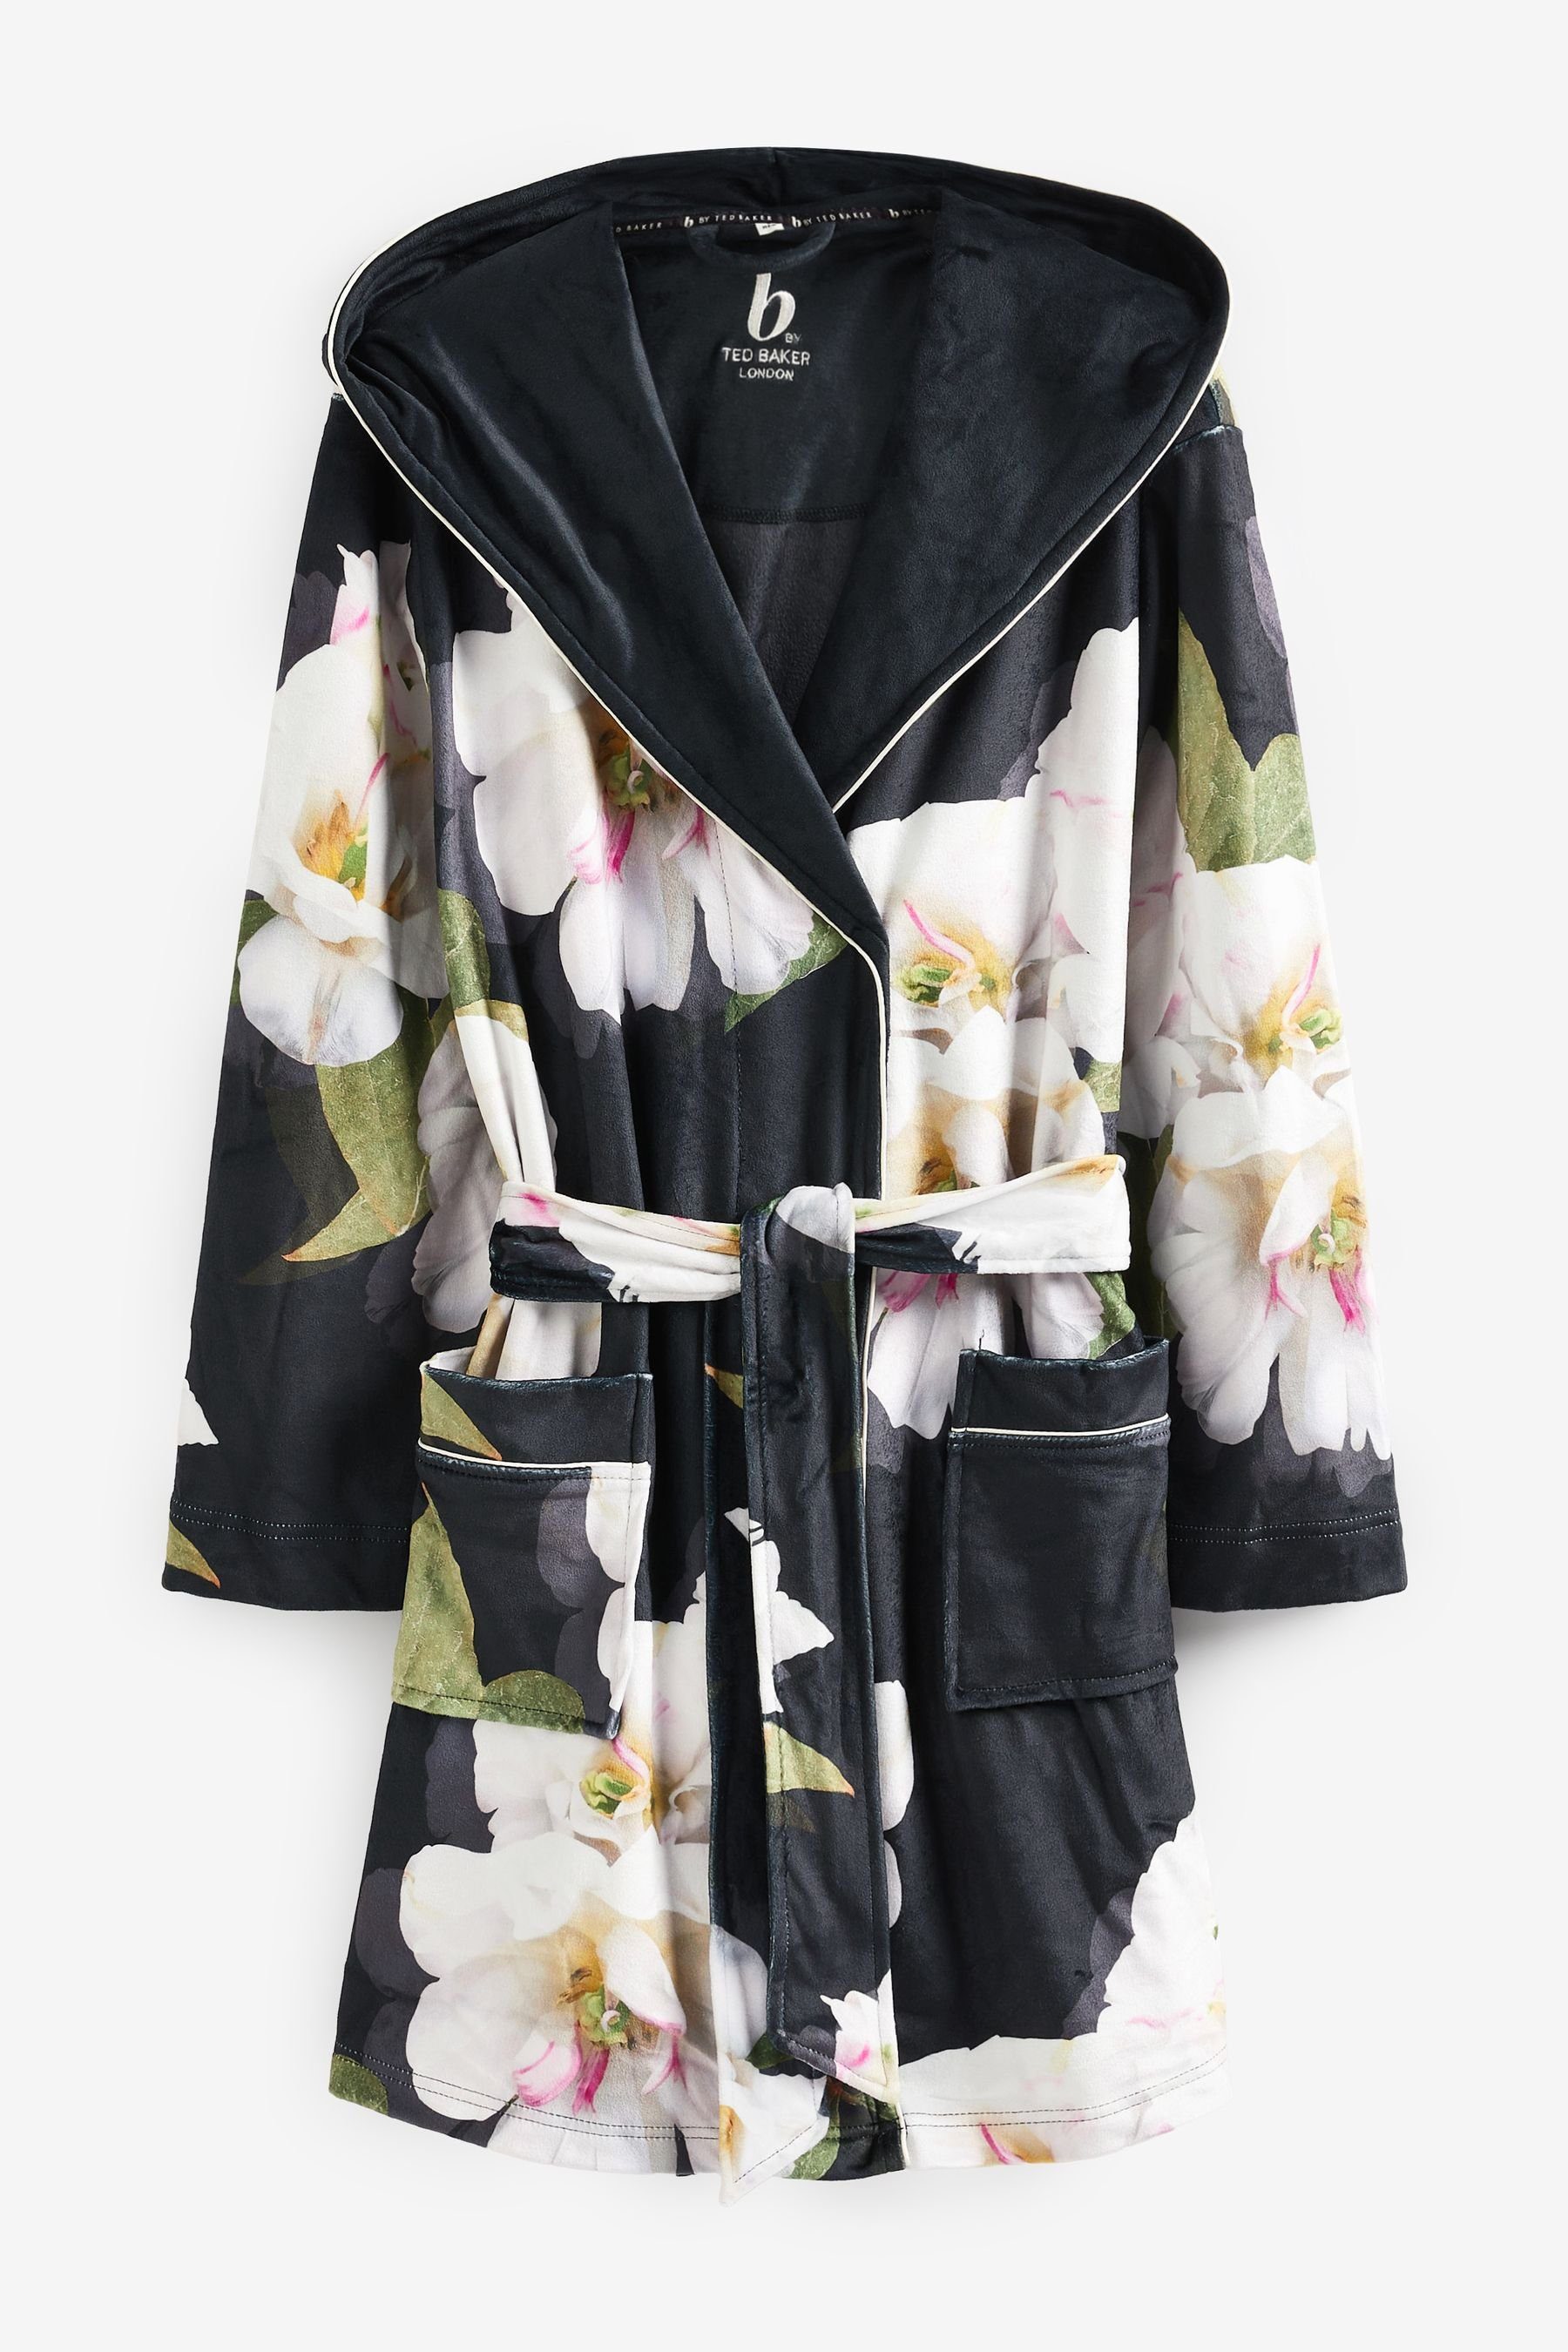 B by Ted Baker Damenbademantel B by Ted Baker Bademantel, Polyester, Elasthan Charcoal Grey Floral